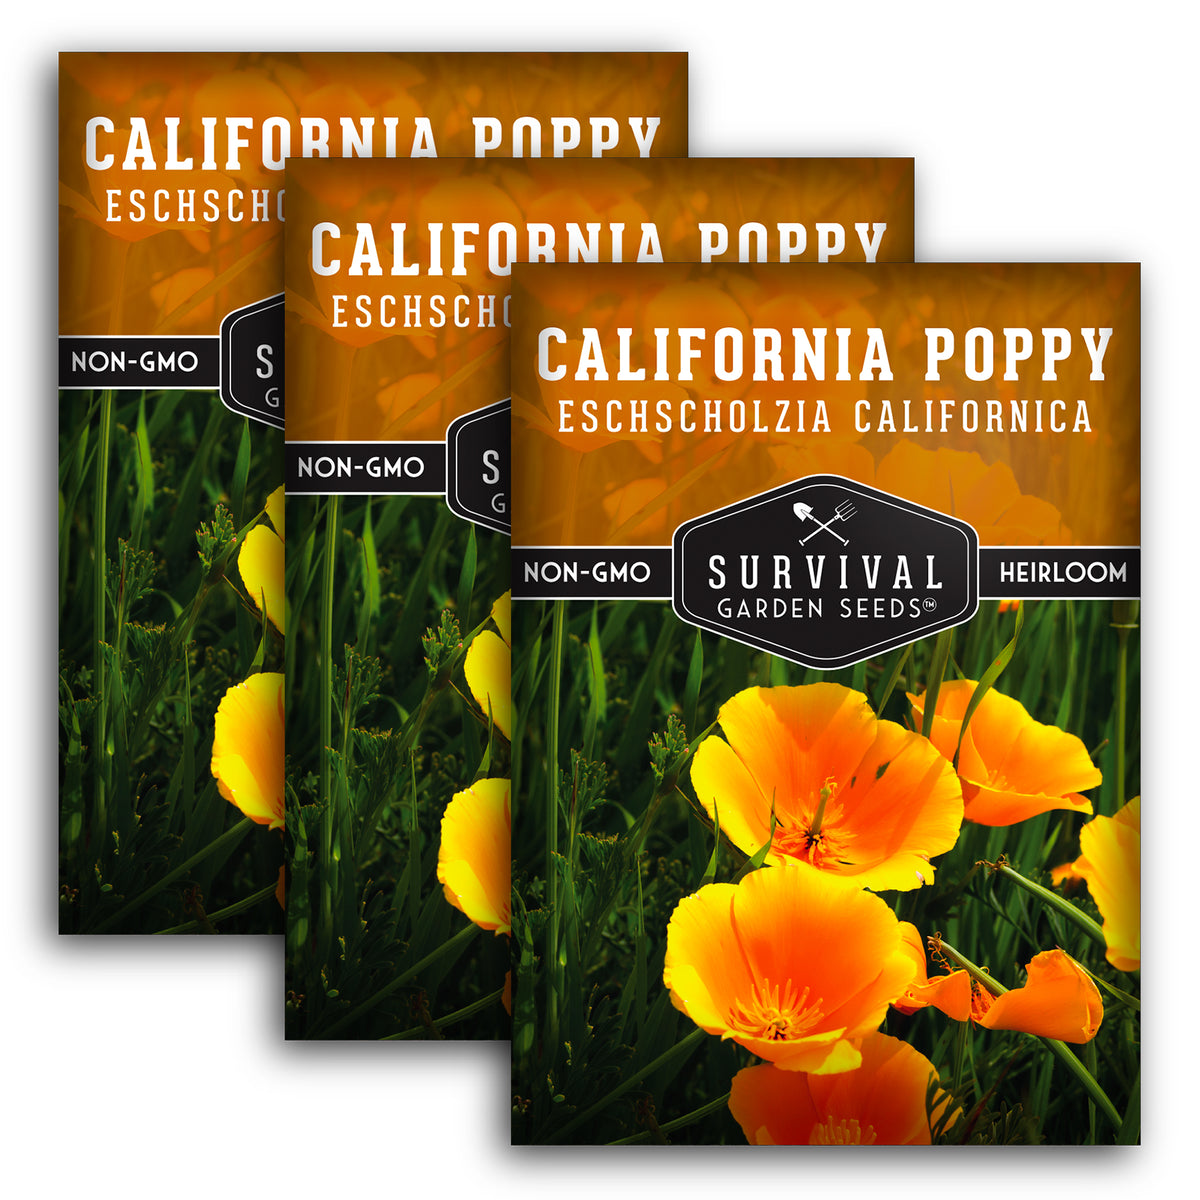 3 packets of California Poppy Seeds